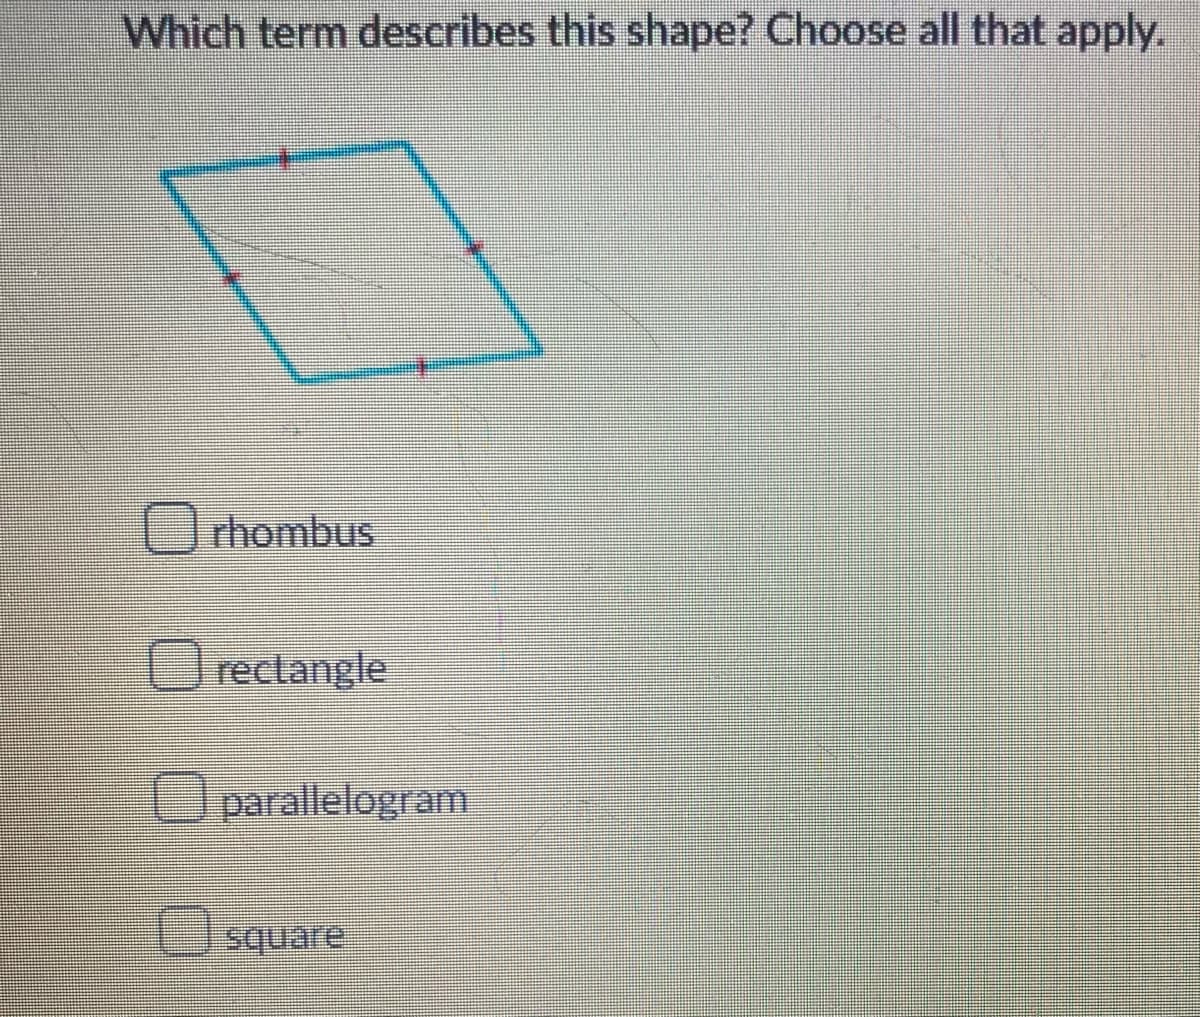 Which term describes this shape? Choose all that apply.
Urhombus
U
reclangle
Uparallelogram
square
